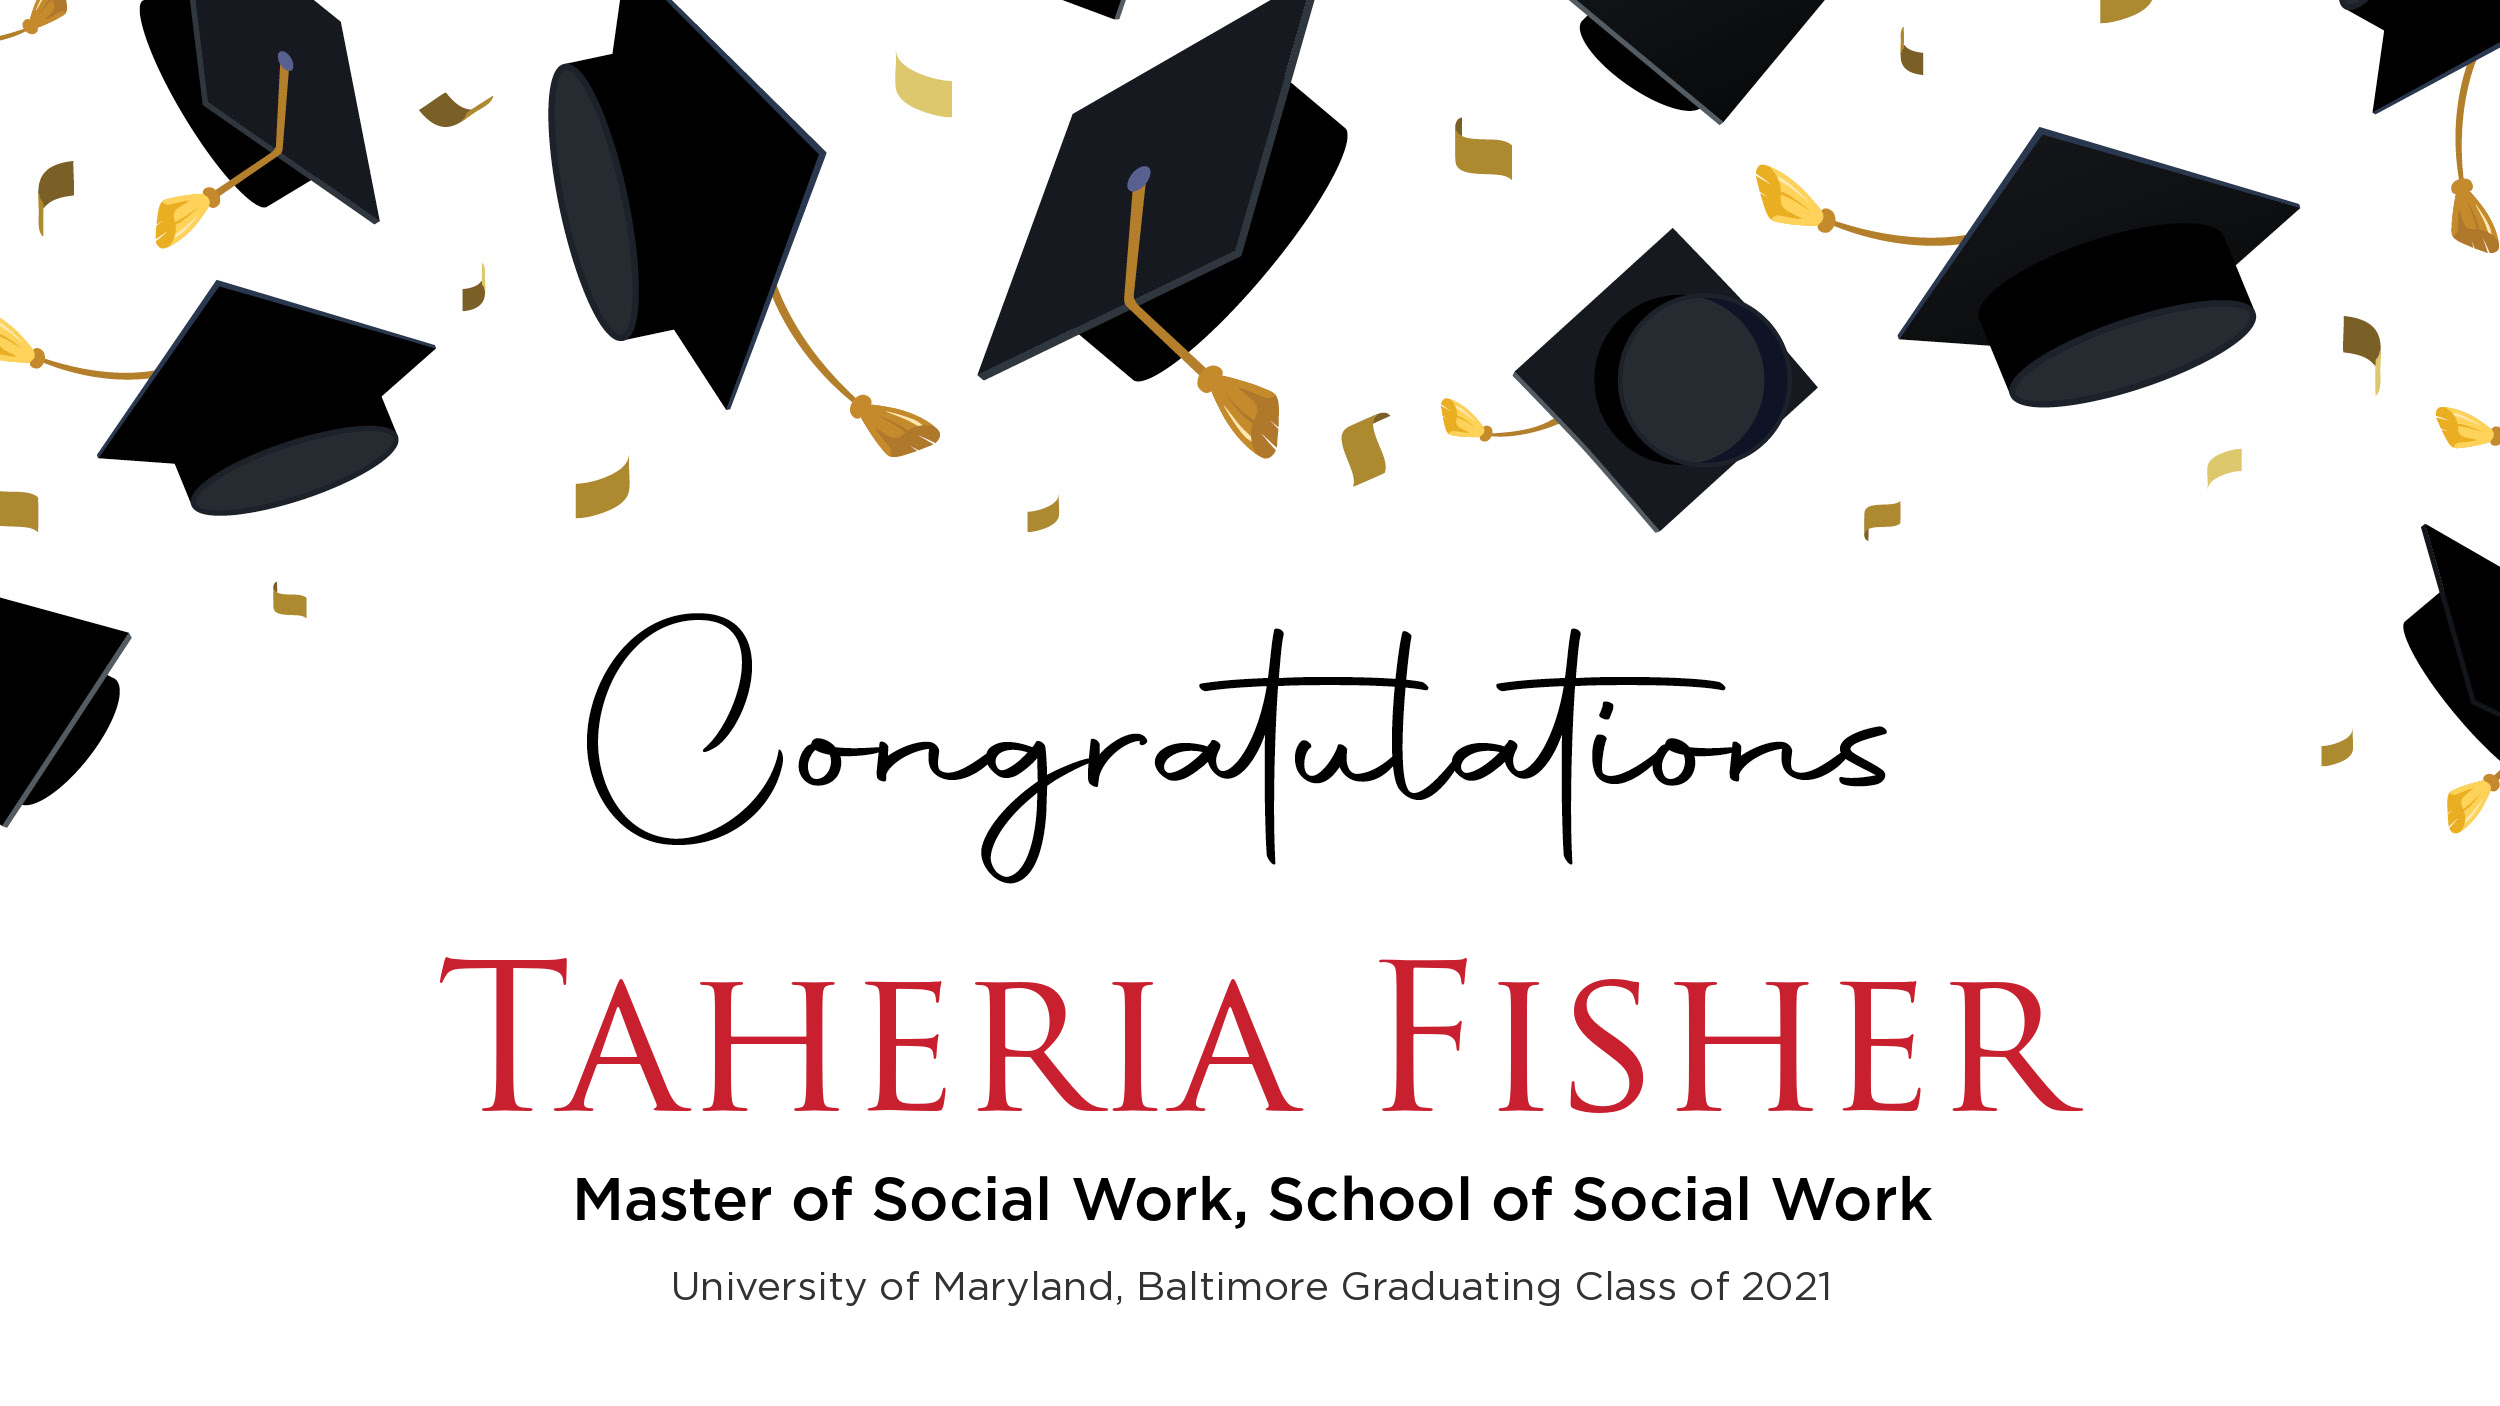 Congratulations Taheria Fisher, Master of Social Work